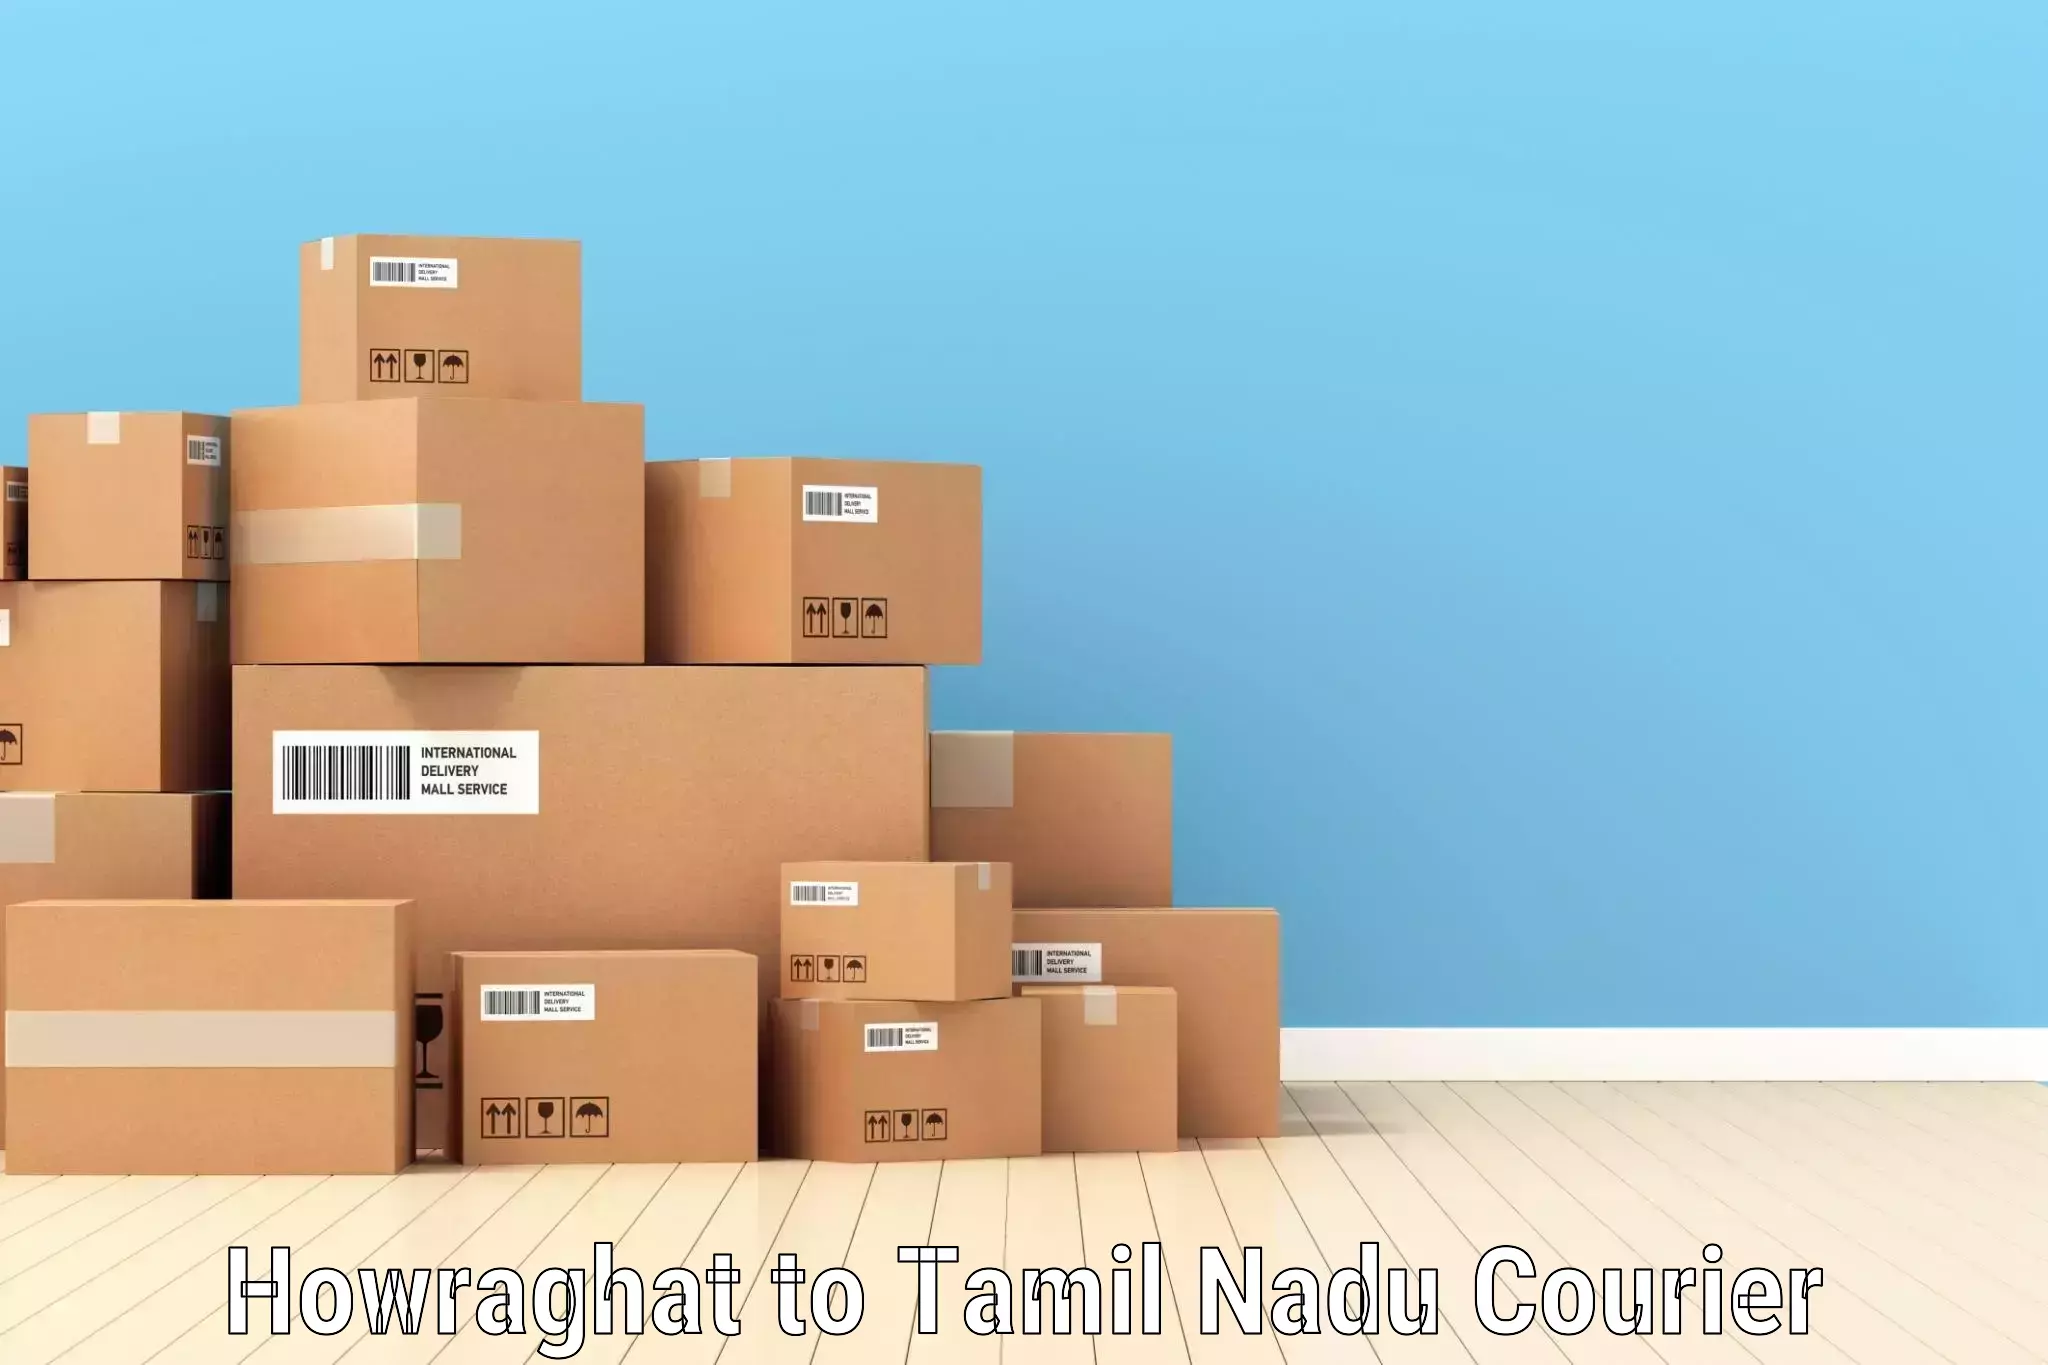 Next-generation courier services Howraghat to Tiruvannamalai